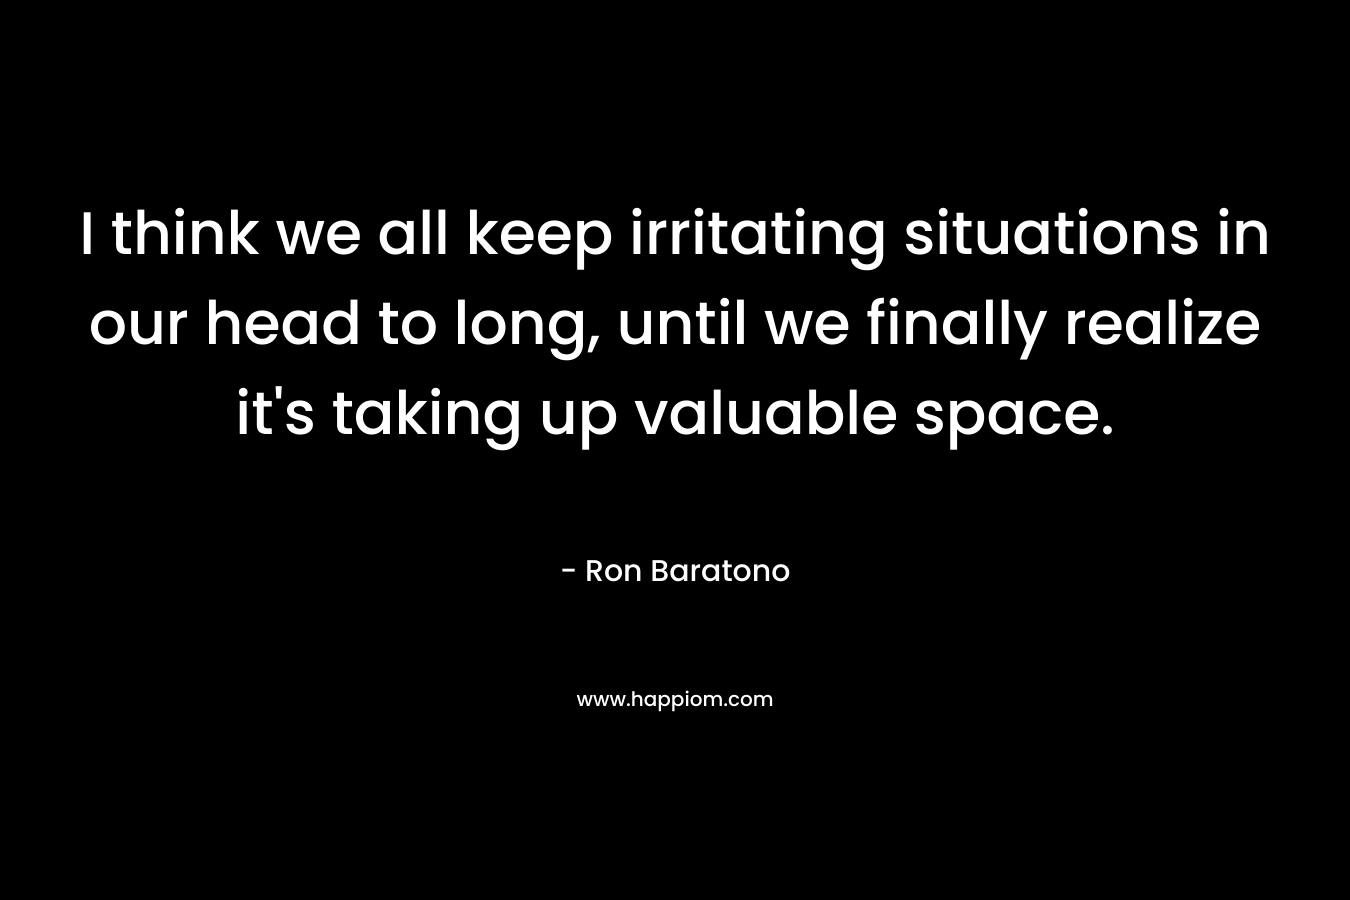 I think we all keep irritating situations in our head to long, until we finally realize it’s taking up valuable space. – Ron Baratono